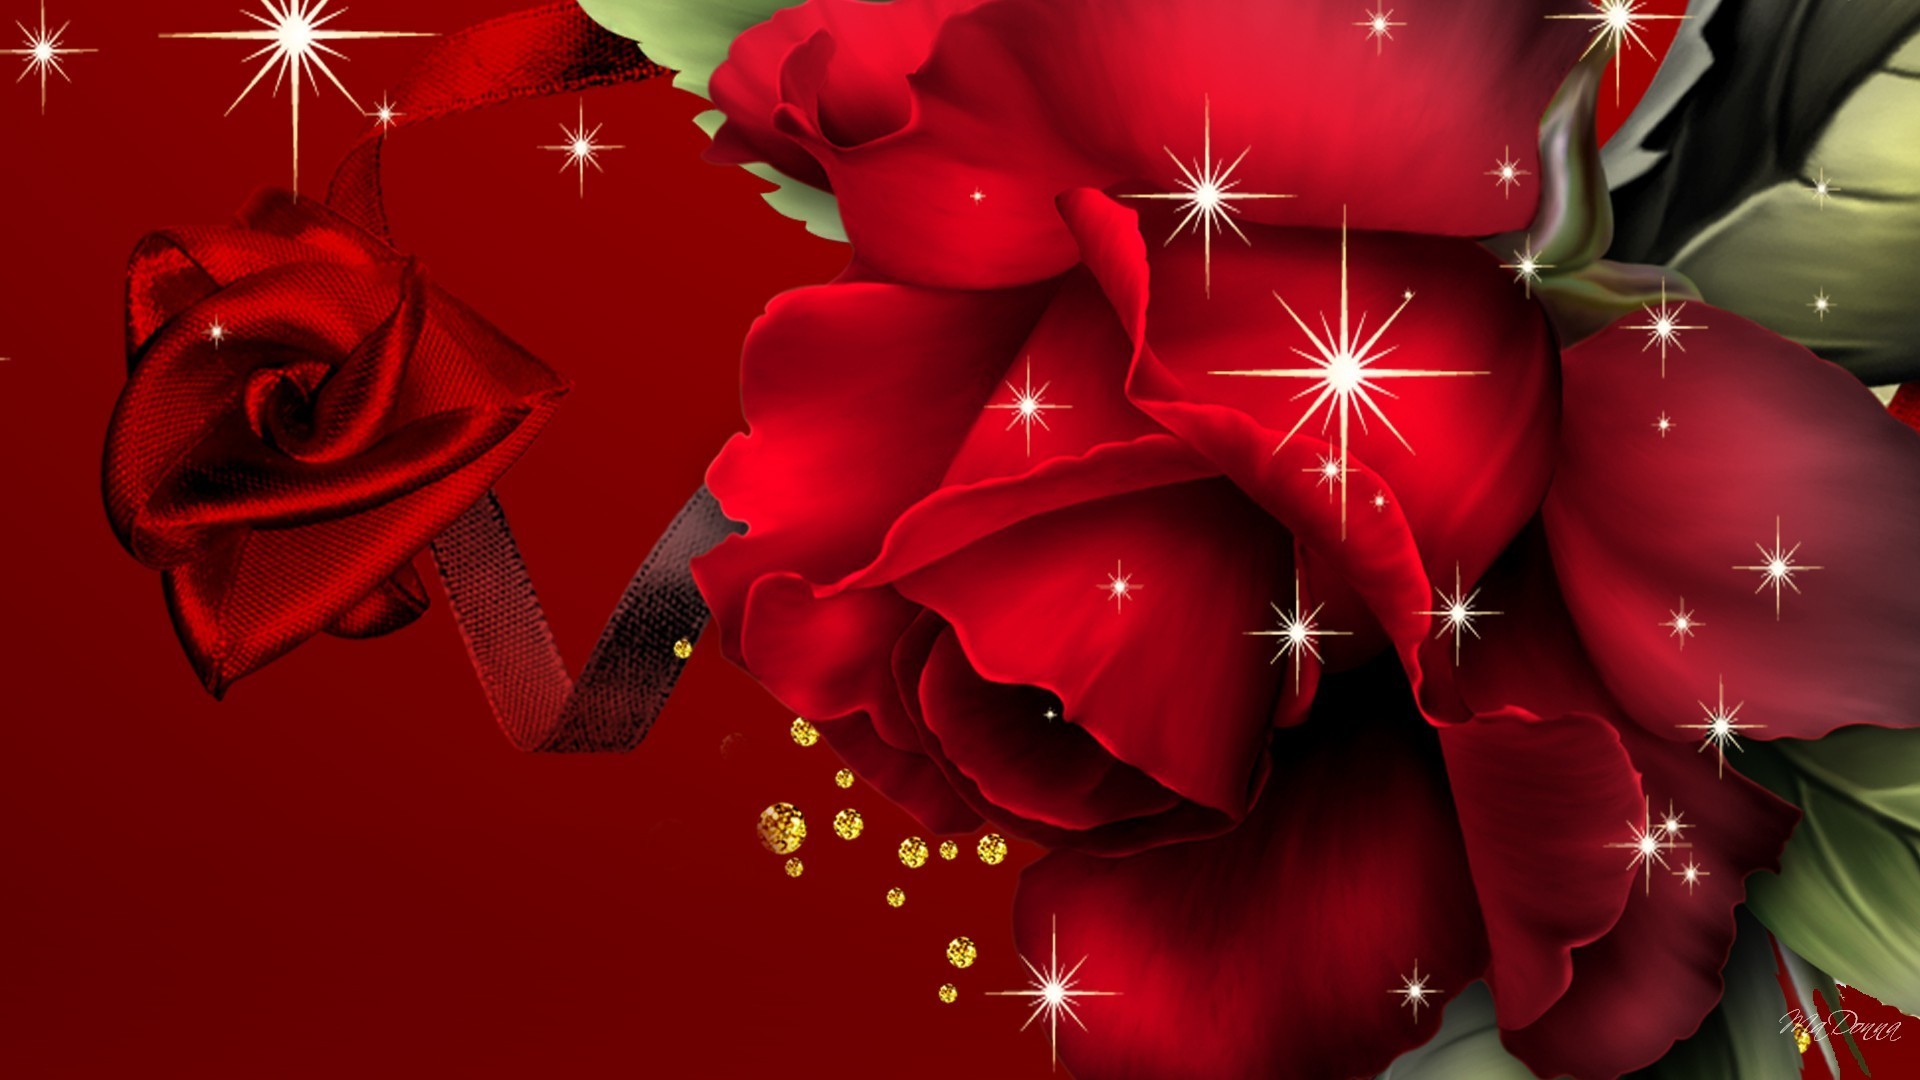 1920x1080  Photos For Red Rose Wallpaper 3d High Resolution Smartphone Red Rose  Wallpaper 3d